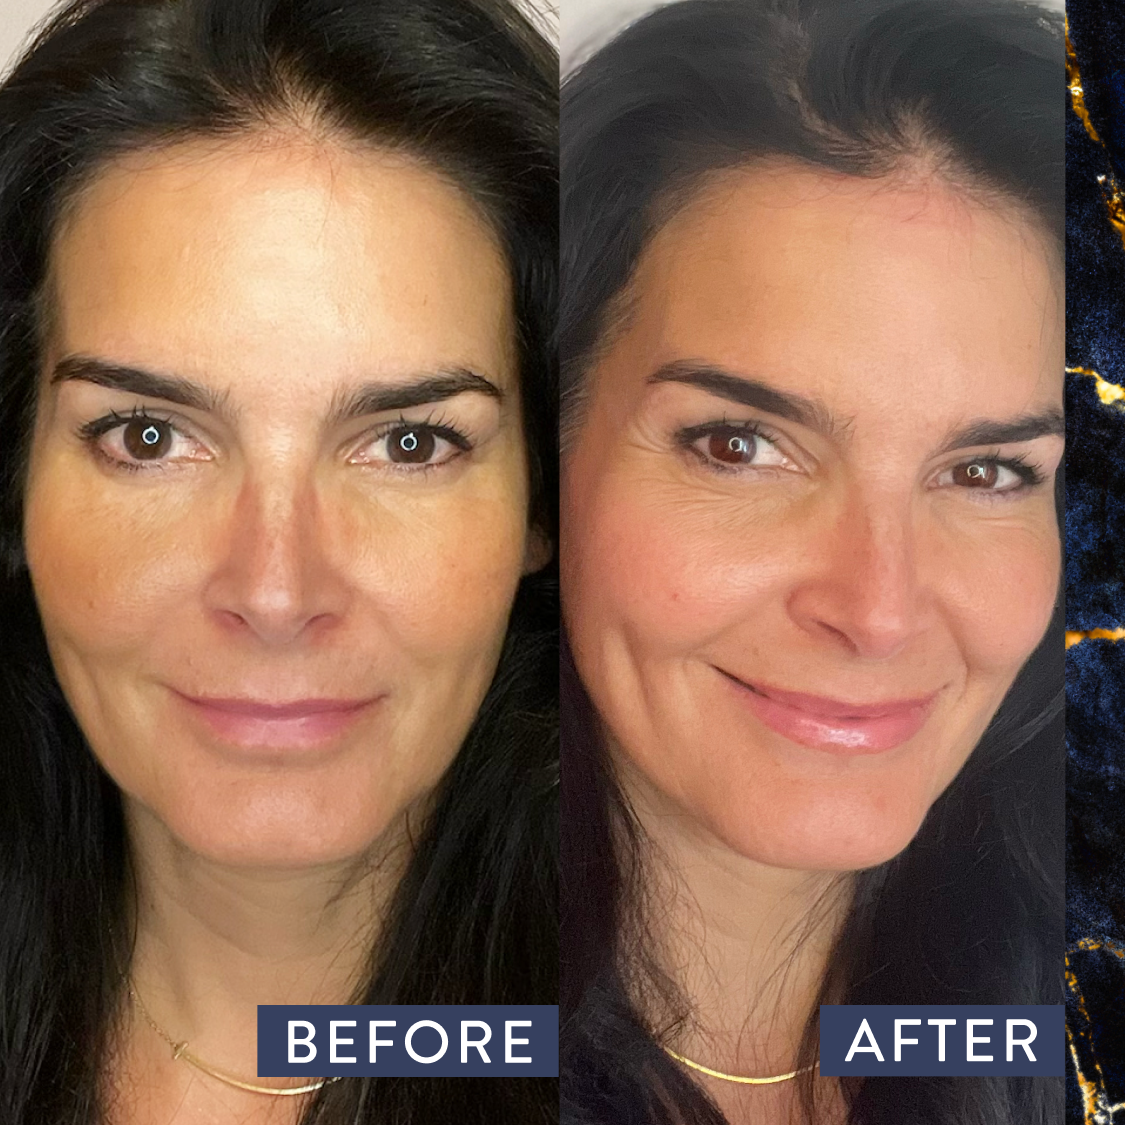 Before and after headshots of Angie Harmon applying baked and balanced makeup.